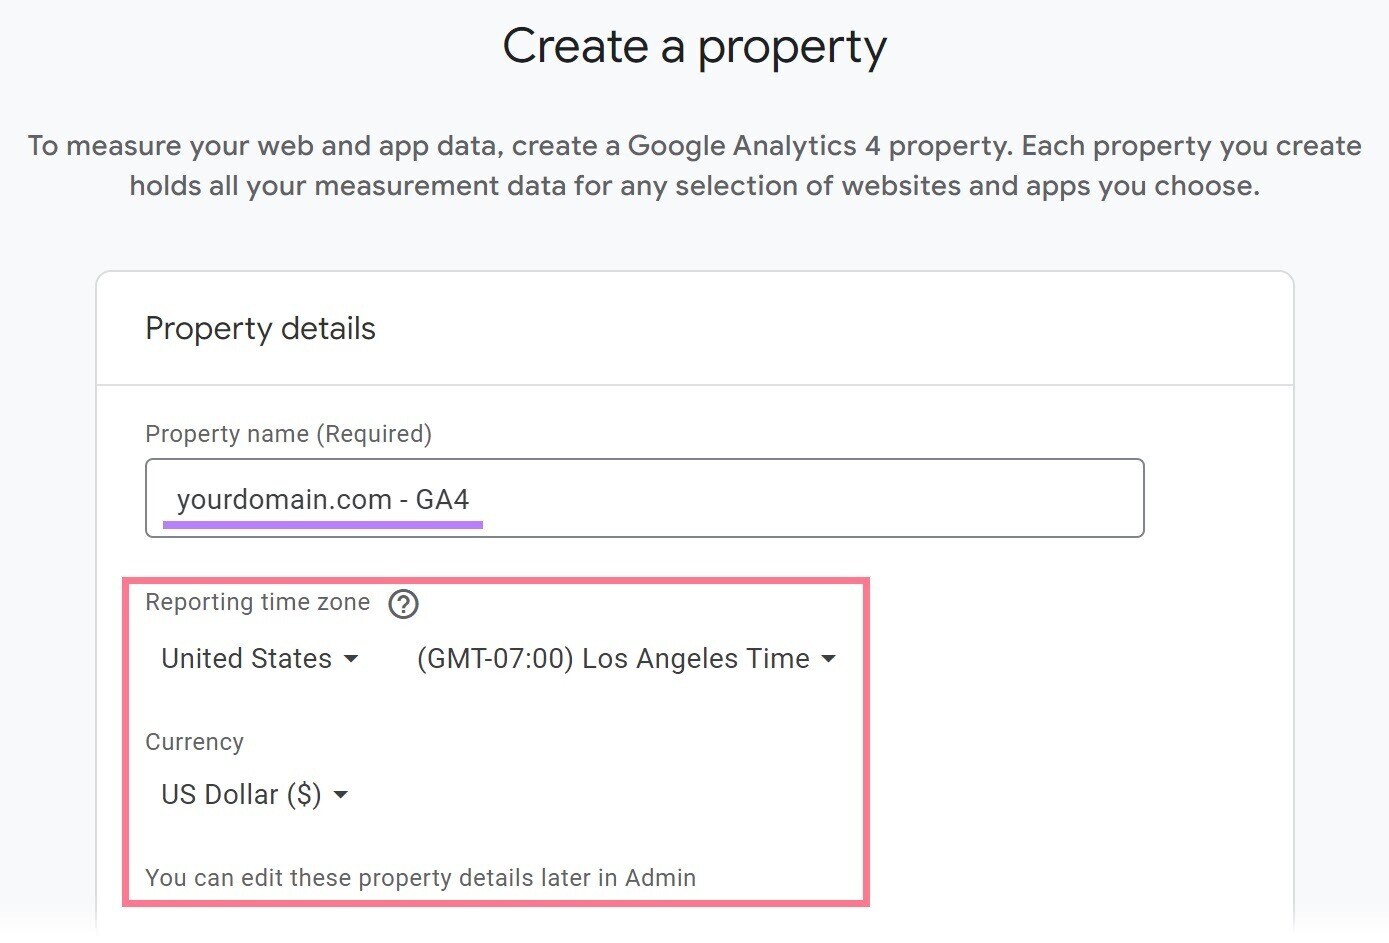 "Create a property" page in Google Analytics